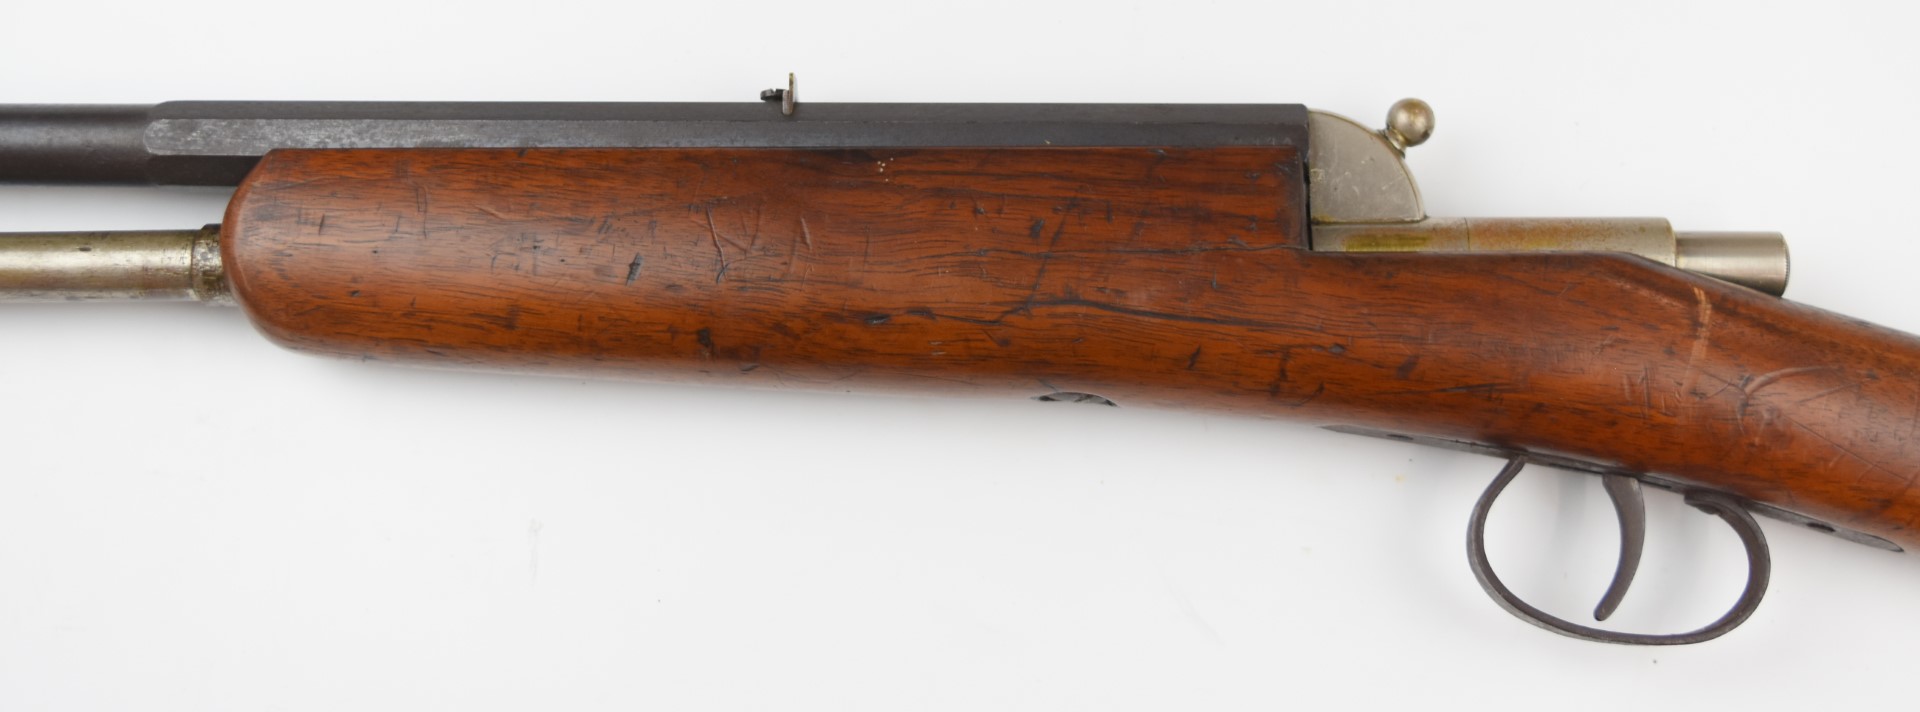 Lee-Nord Excellent C1 .22 pump-action air rifle with raised cheek-piece to the stock, adjustable - Image 12 of 17